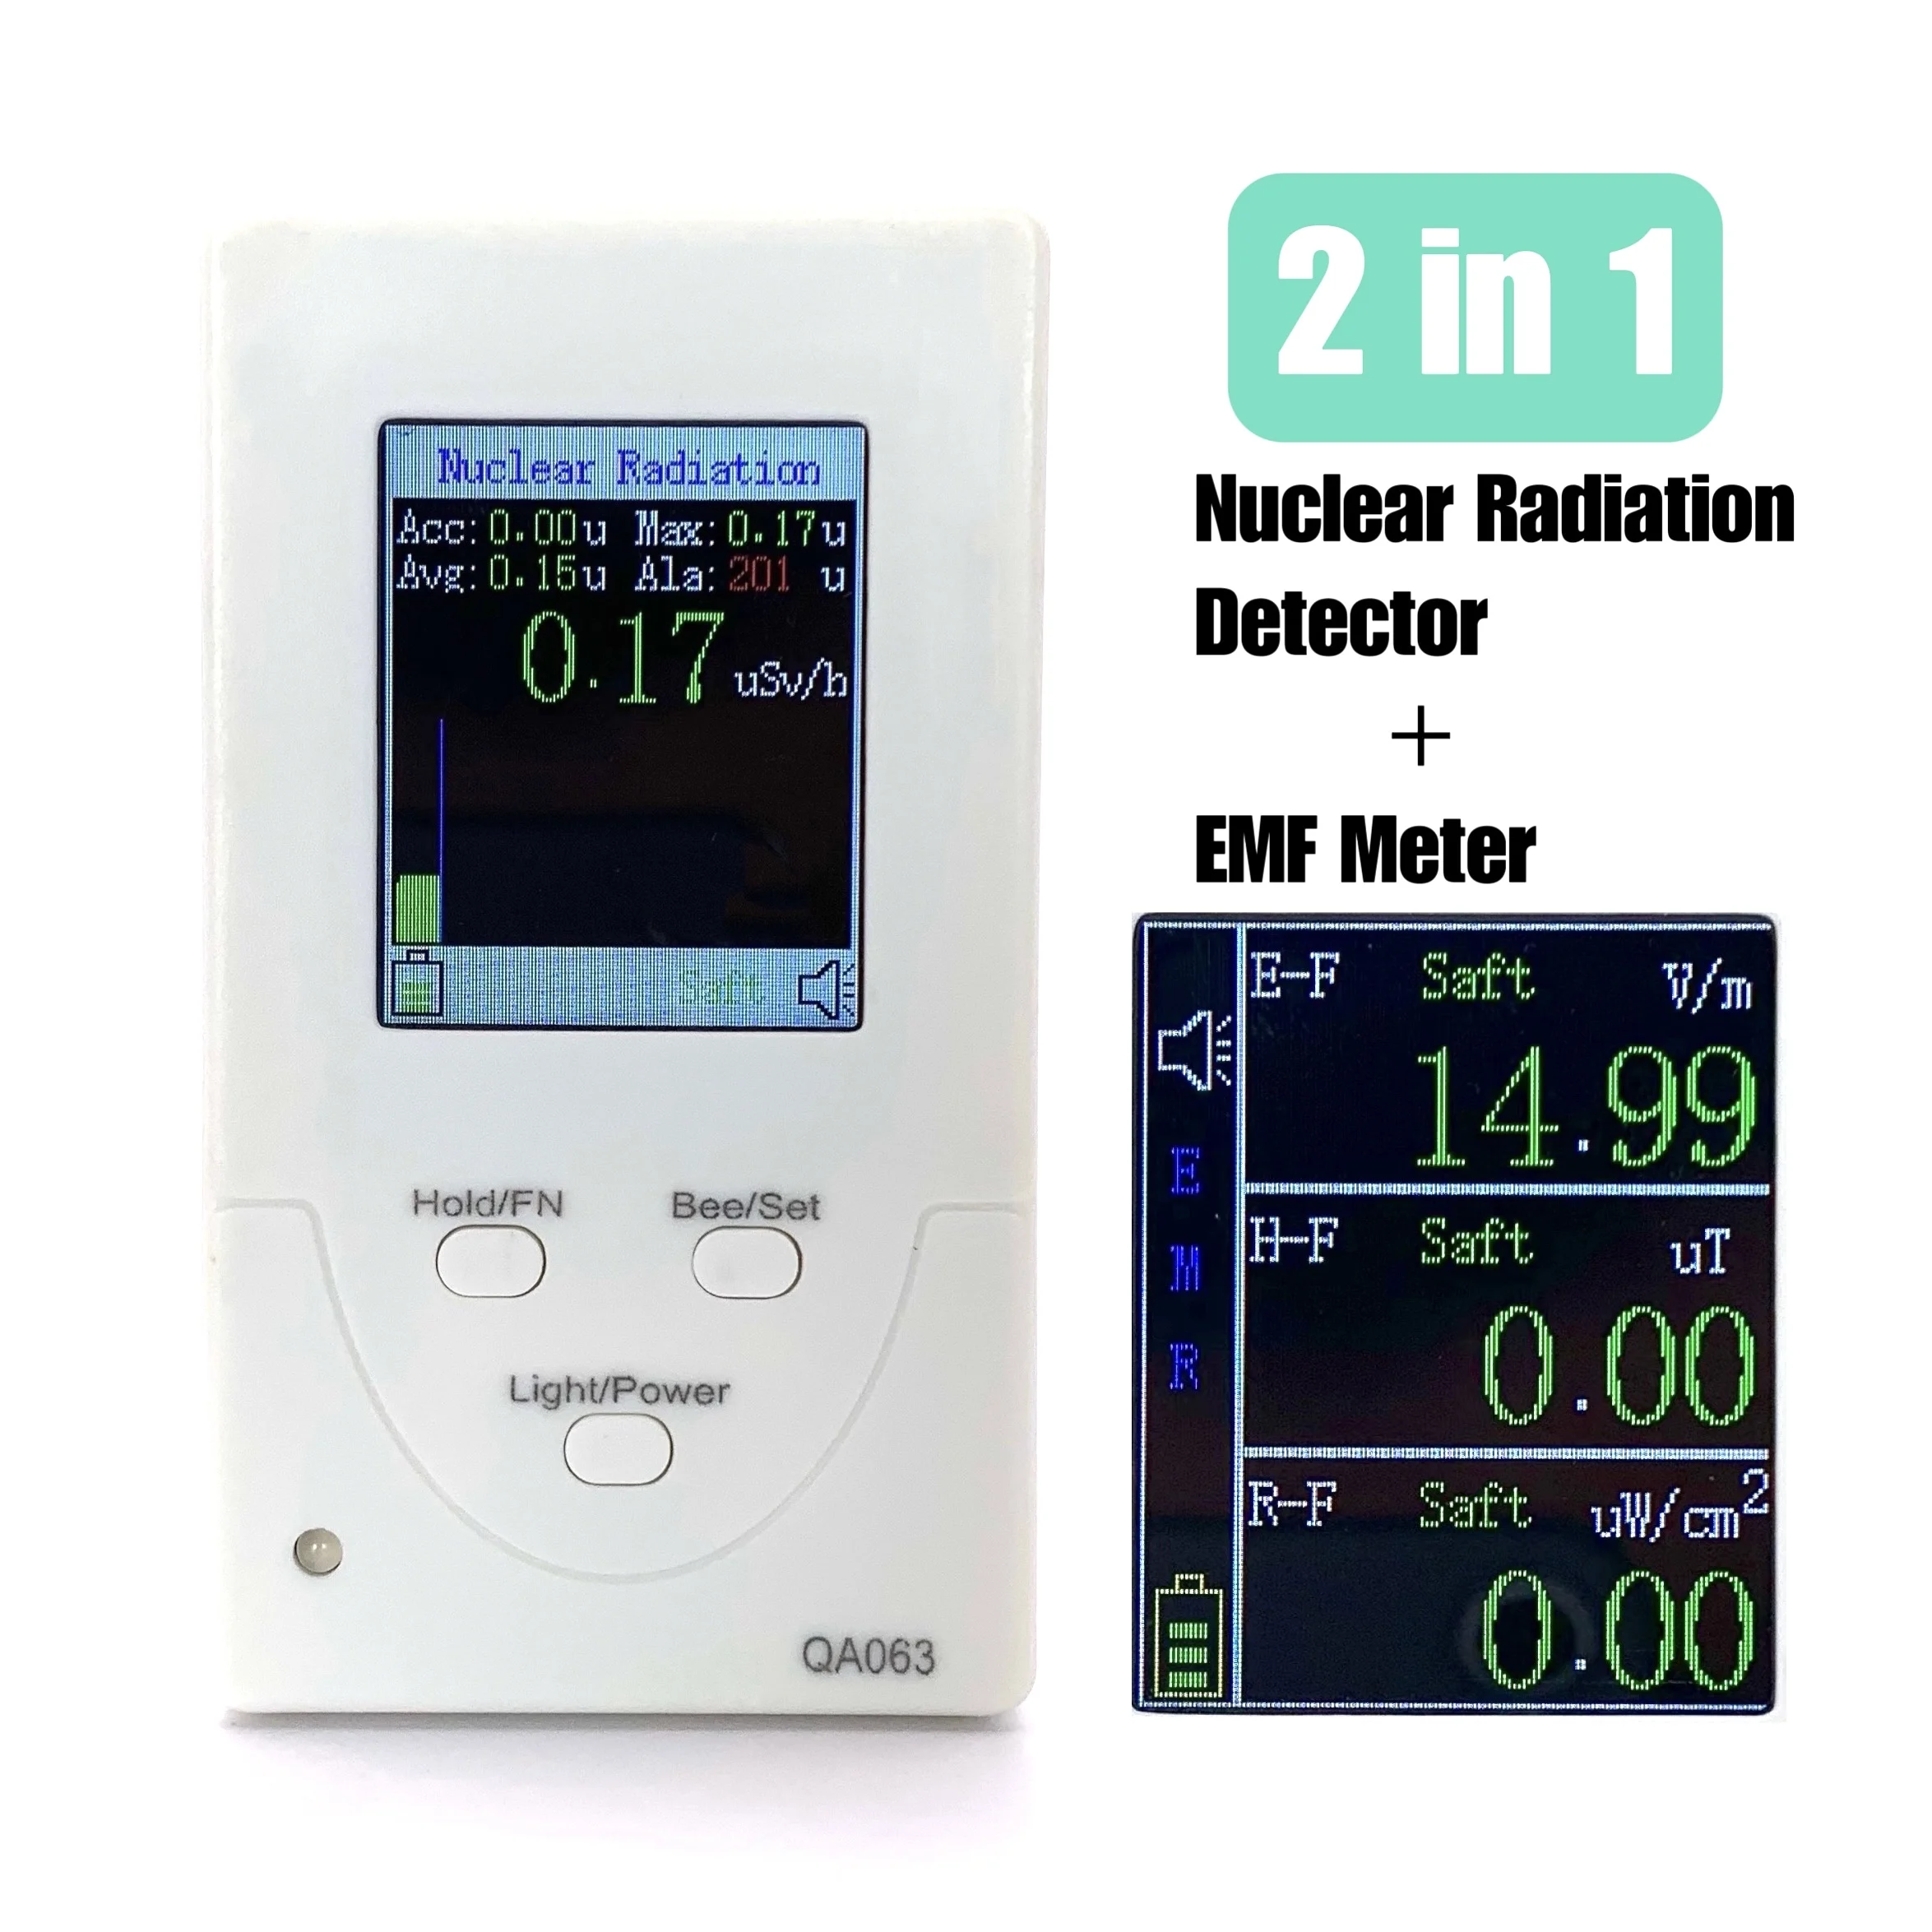 

TOOLTOP Geiger Counter Dosimeter Nuclear Radiation Detector Hard β γ-ray X-ray Iodine 131 Detector 3 Alarm Ways EMF Meter